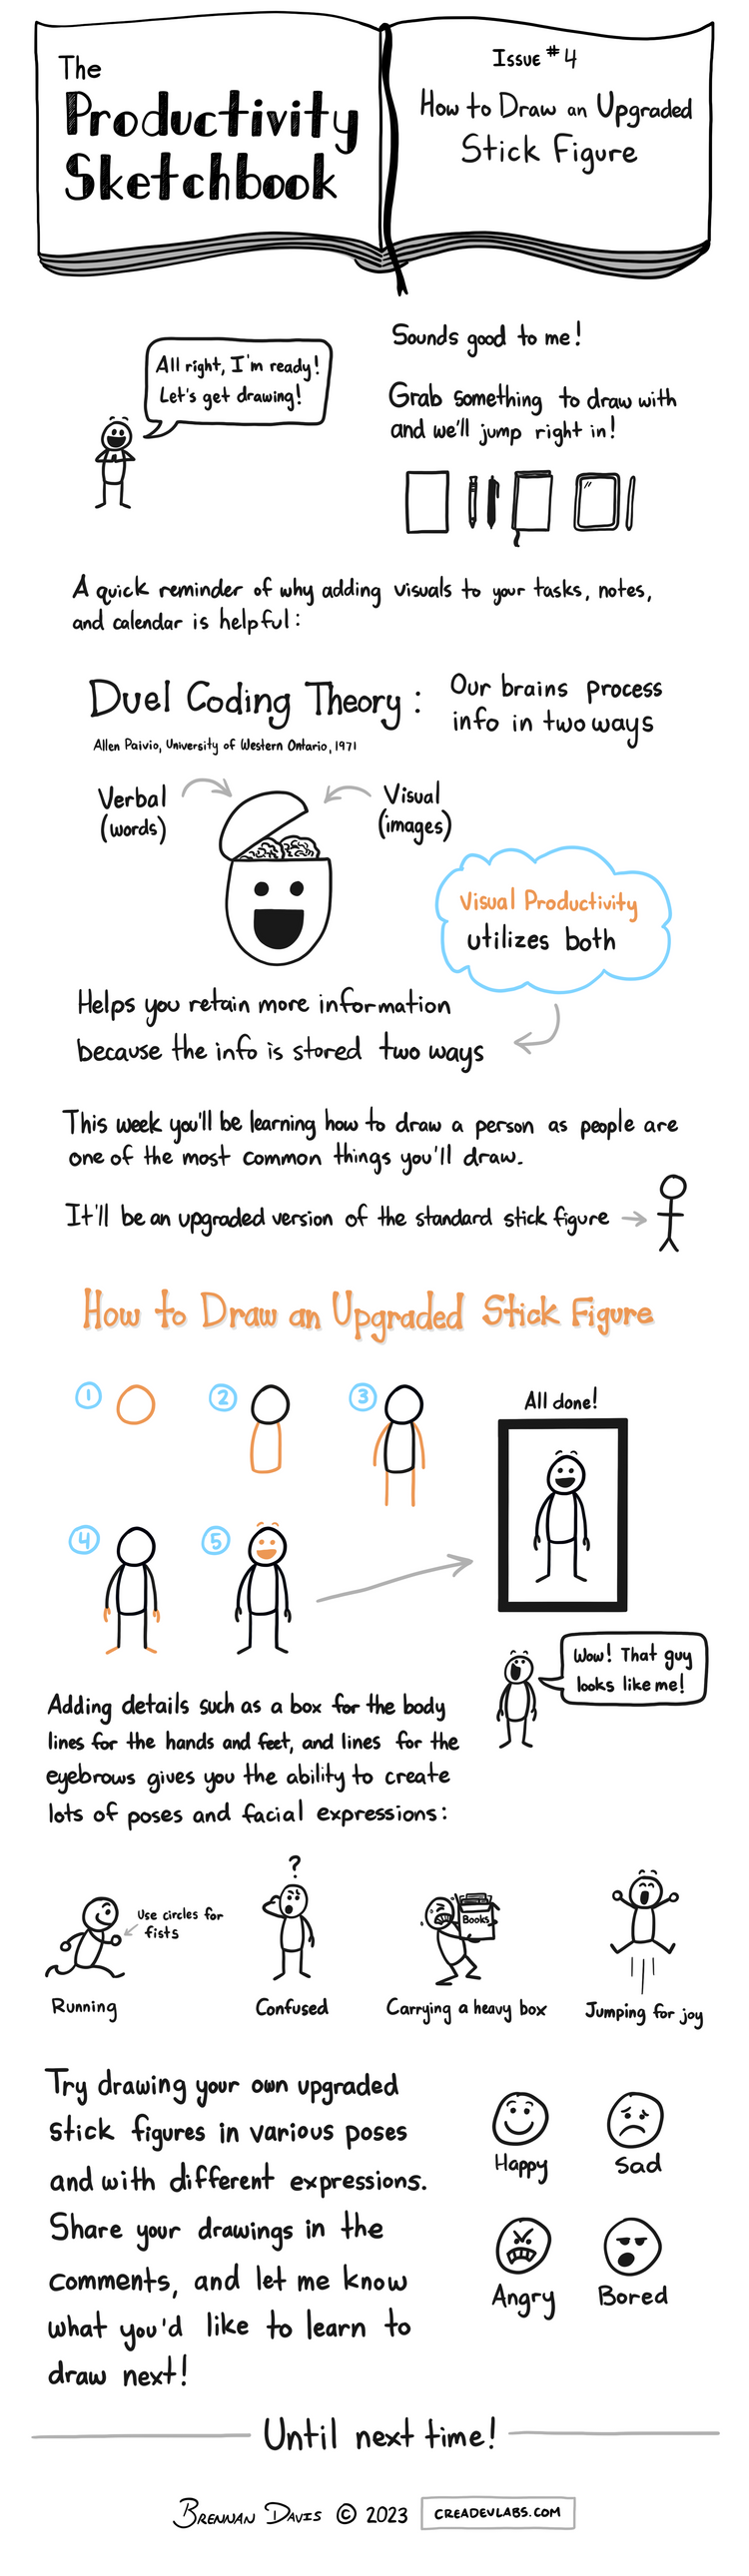 The Productivity Sketchbook #4: How to Draw an Upgraded Stick Figure